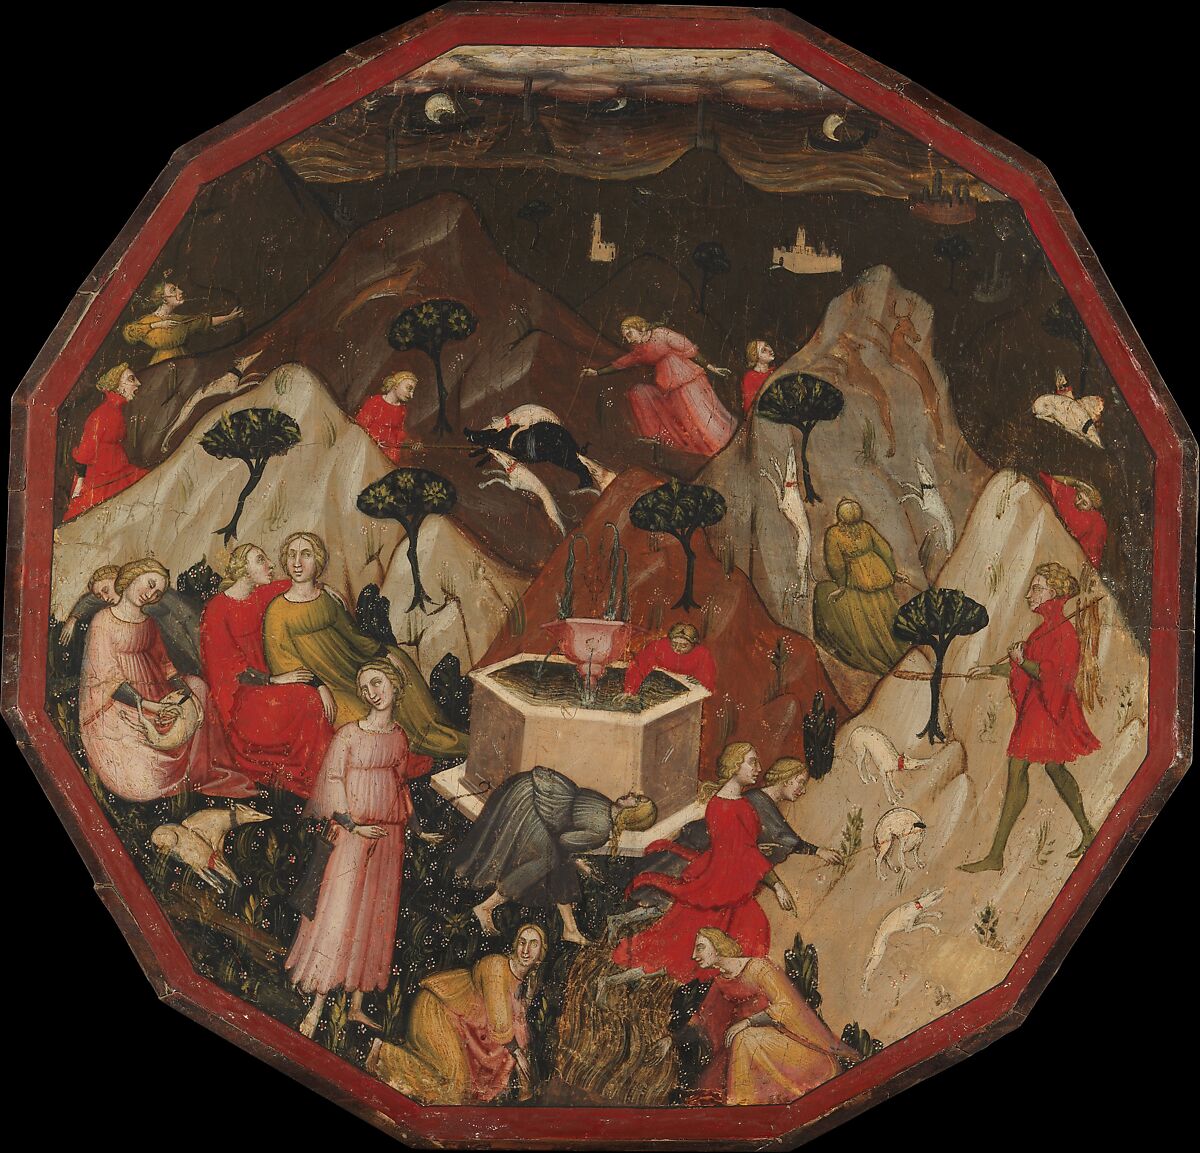 Ameto's Discovery of the Nymphs, Master of 1416 (Italian, Florentine, early 15th century), Tempera on wood 